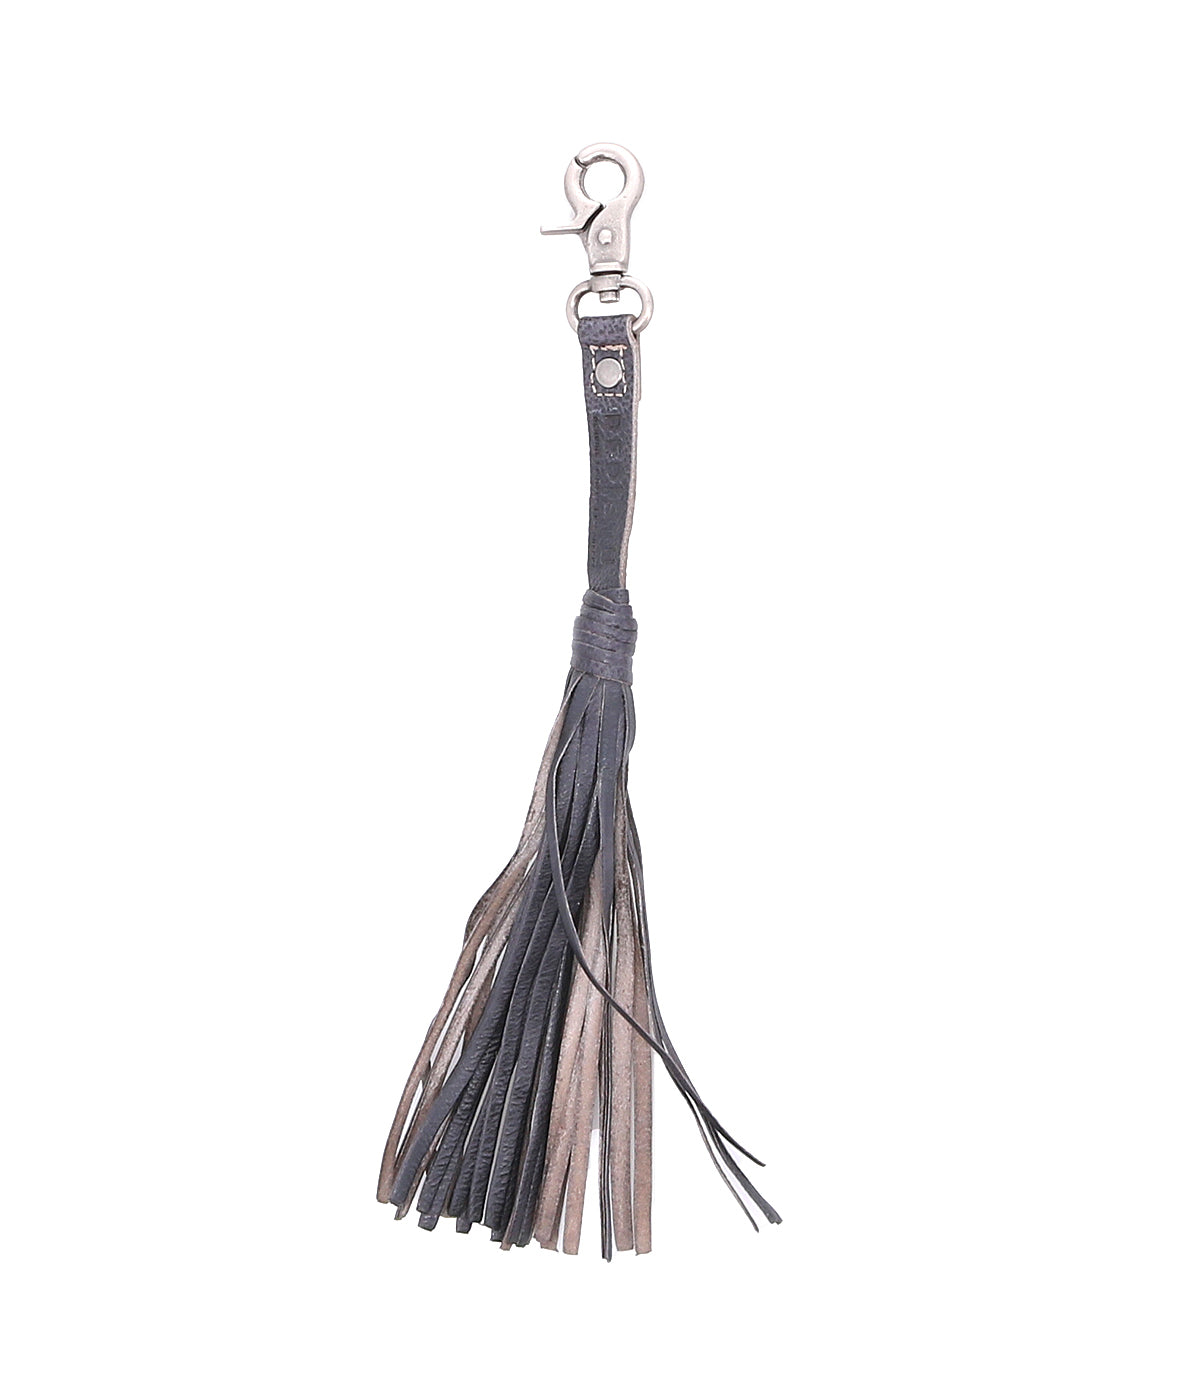 An accessory with a Bed Stu Tassel Clip for personal expression, featuring a leather tassel.